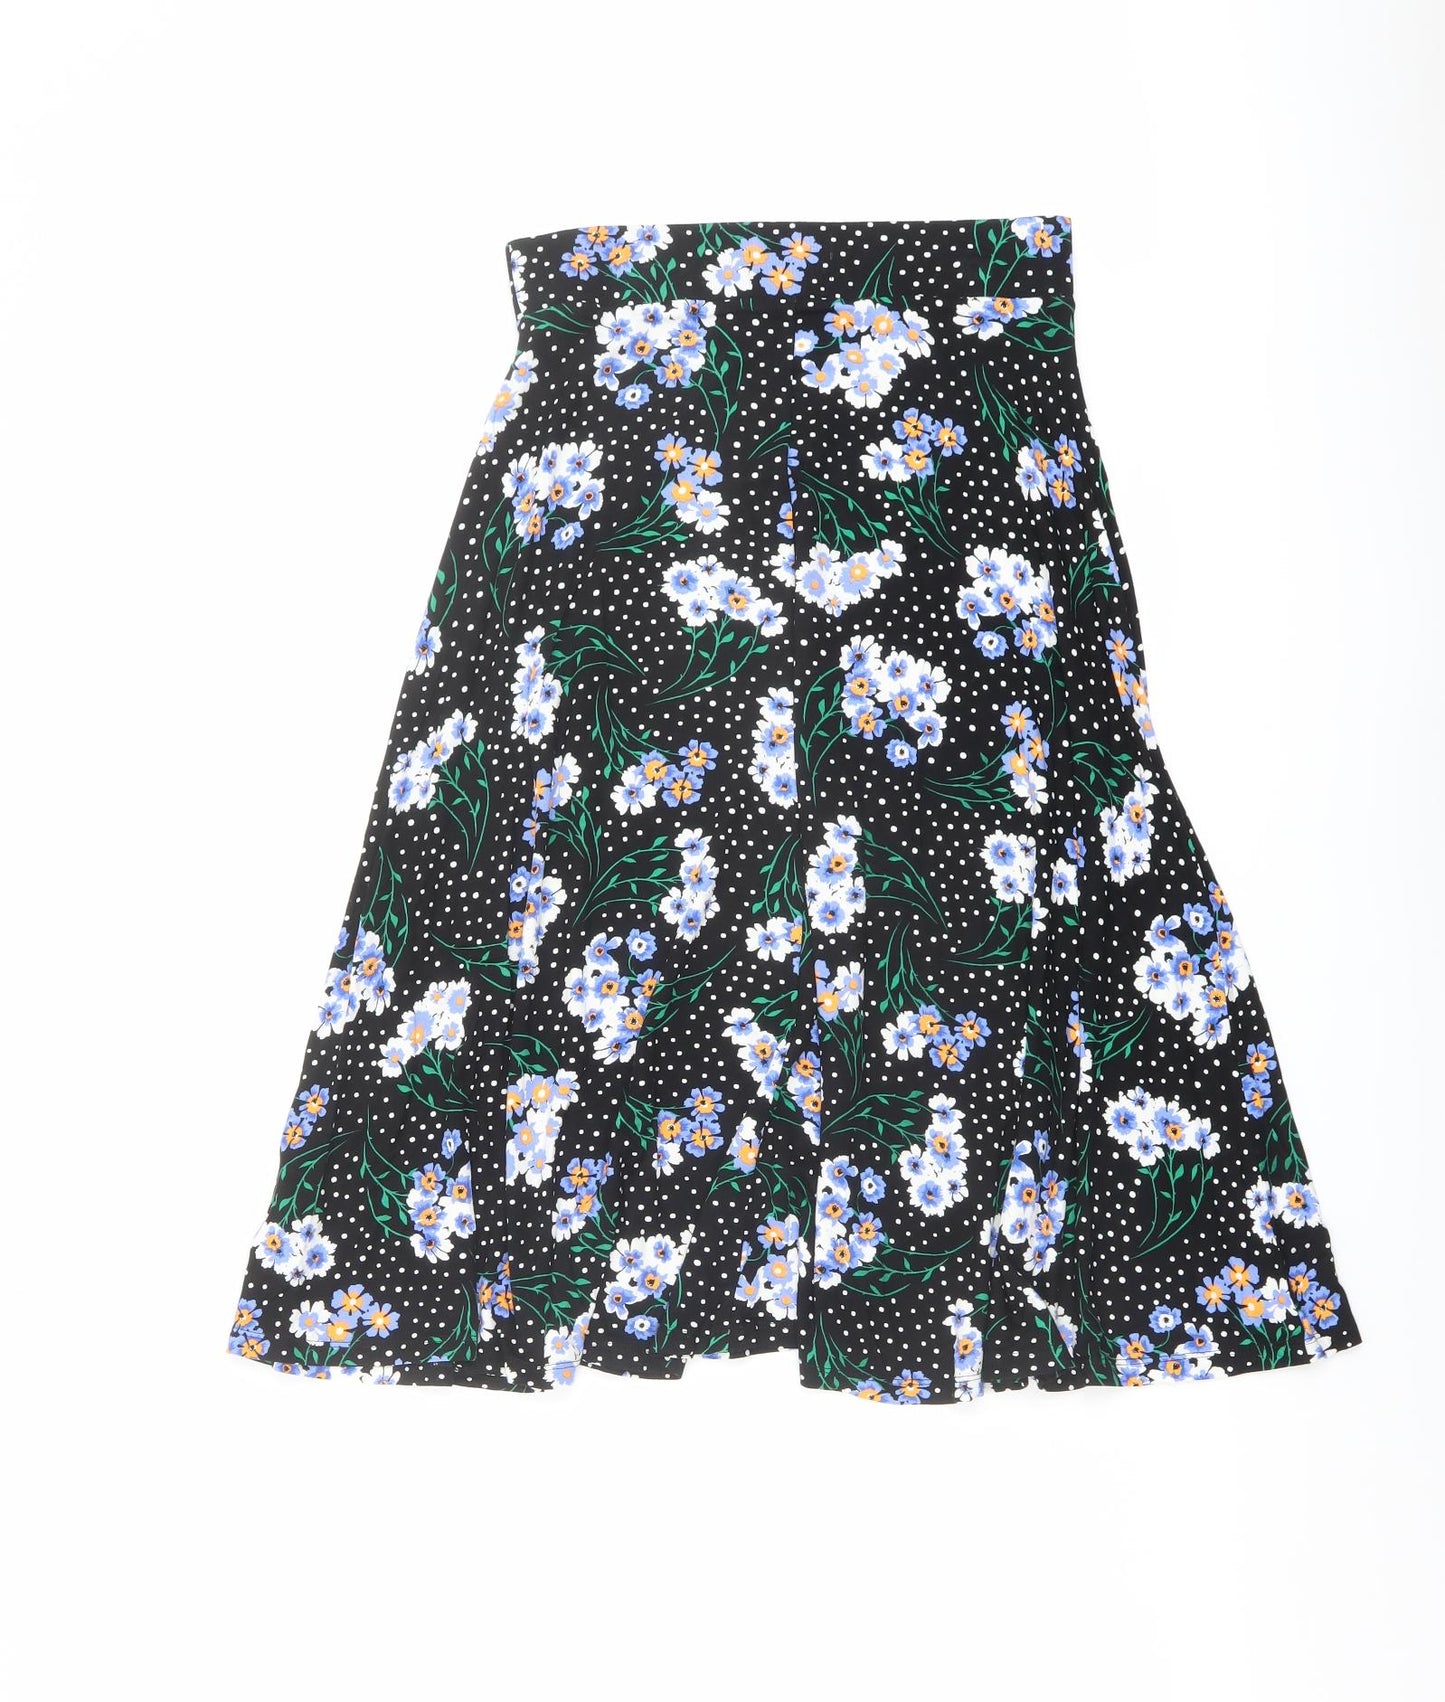 Marks and Spencer Womens Black Floral Viscose Swing Skirt Size 8